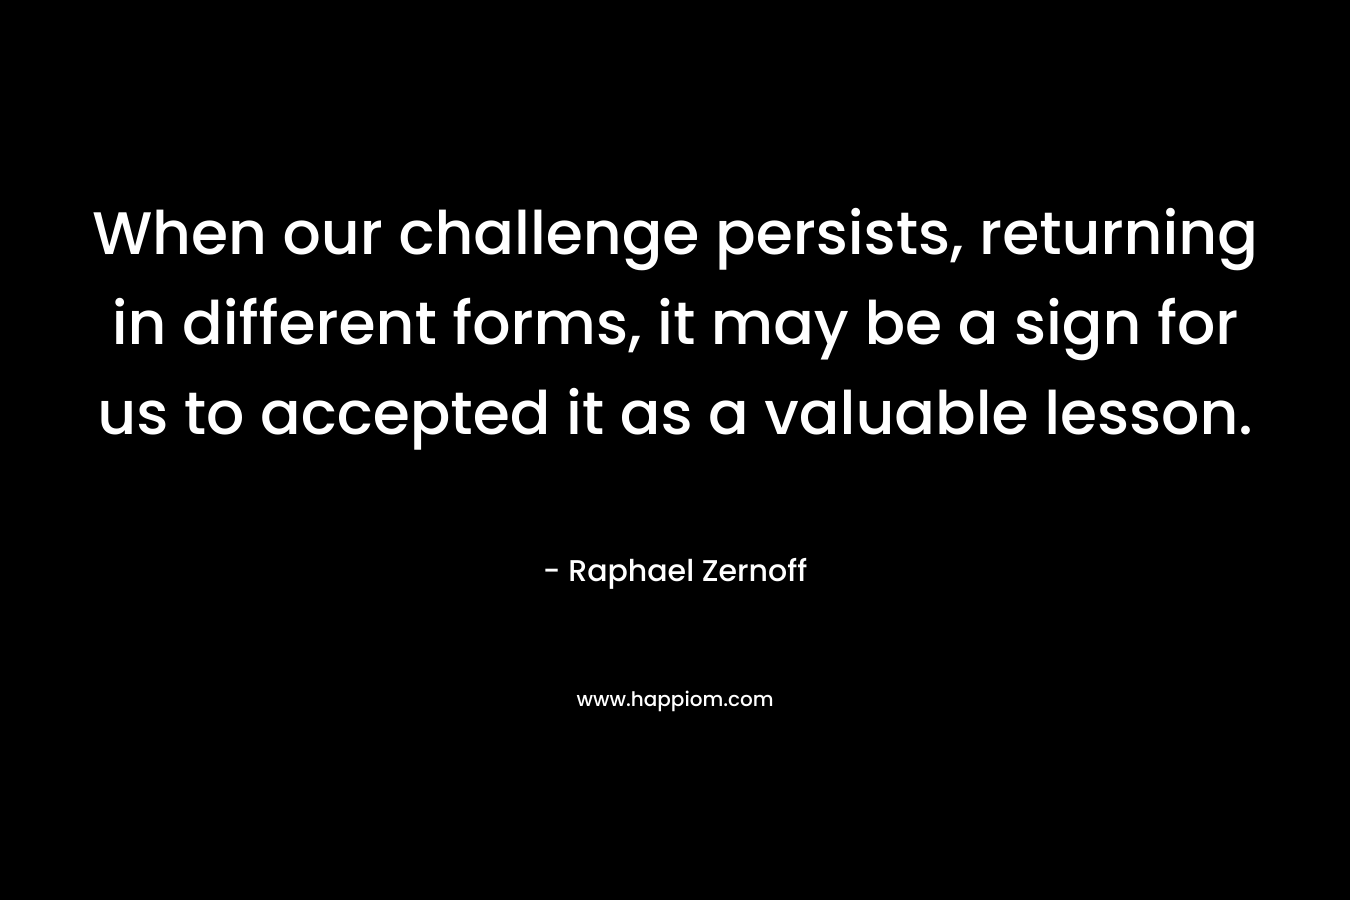 When our challenge persists, returning in different forms, it may be a sign for us to accepted it as a valuable lesson. – Raphael Zernoff